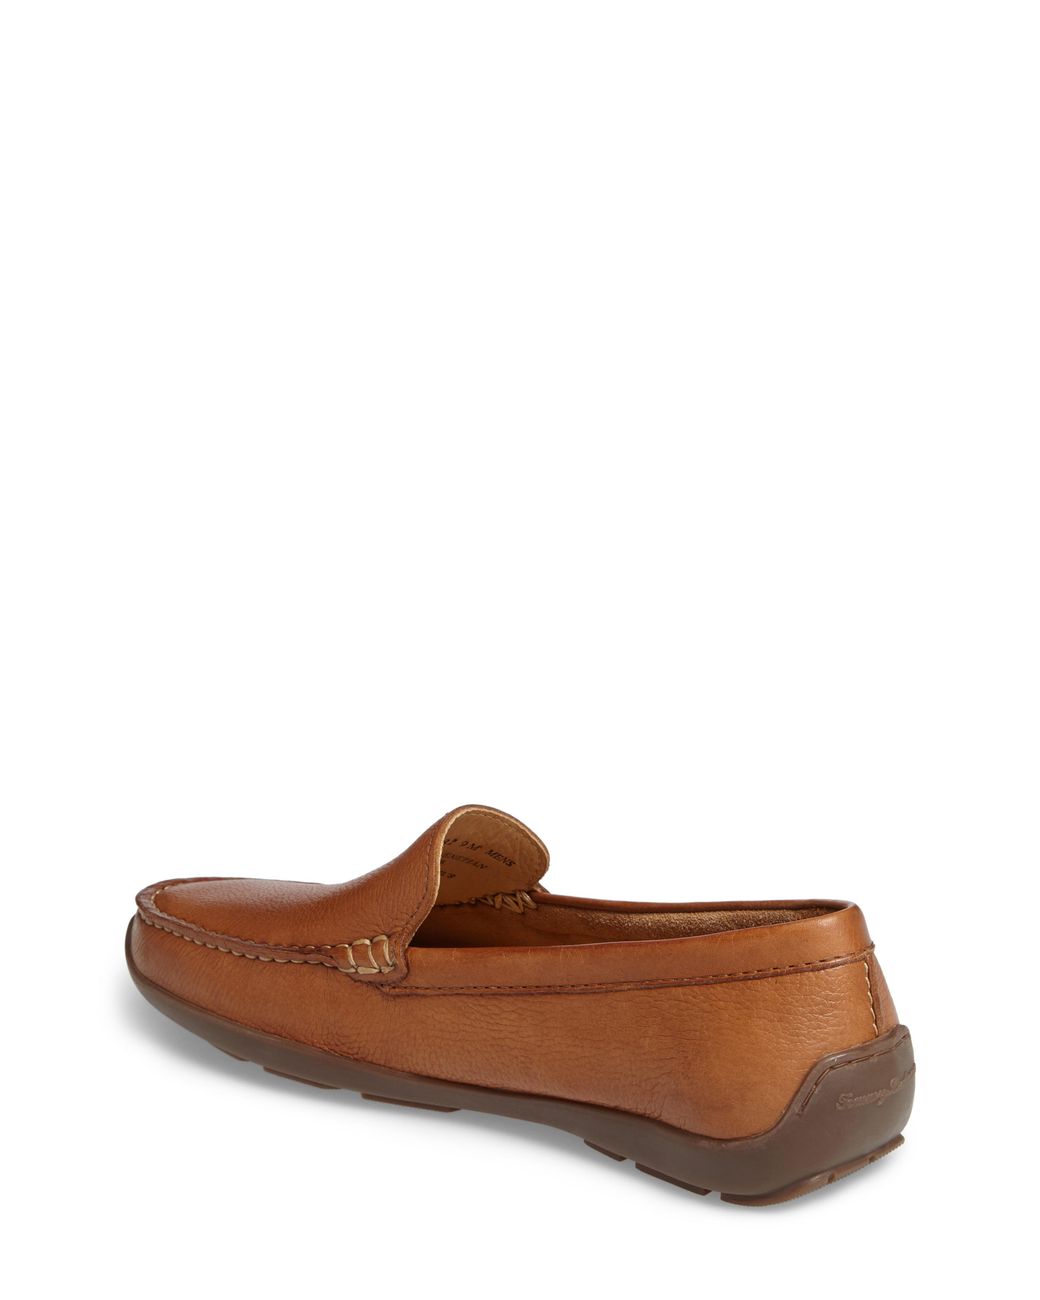 Tommy Bahama Men's Brown Pompei Leather Moccasins Size 10 BNWT $148 